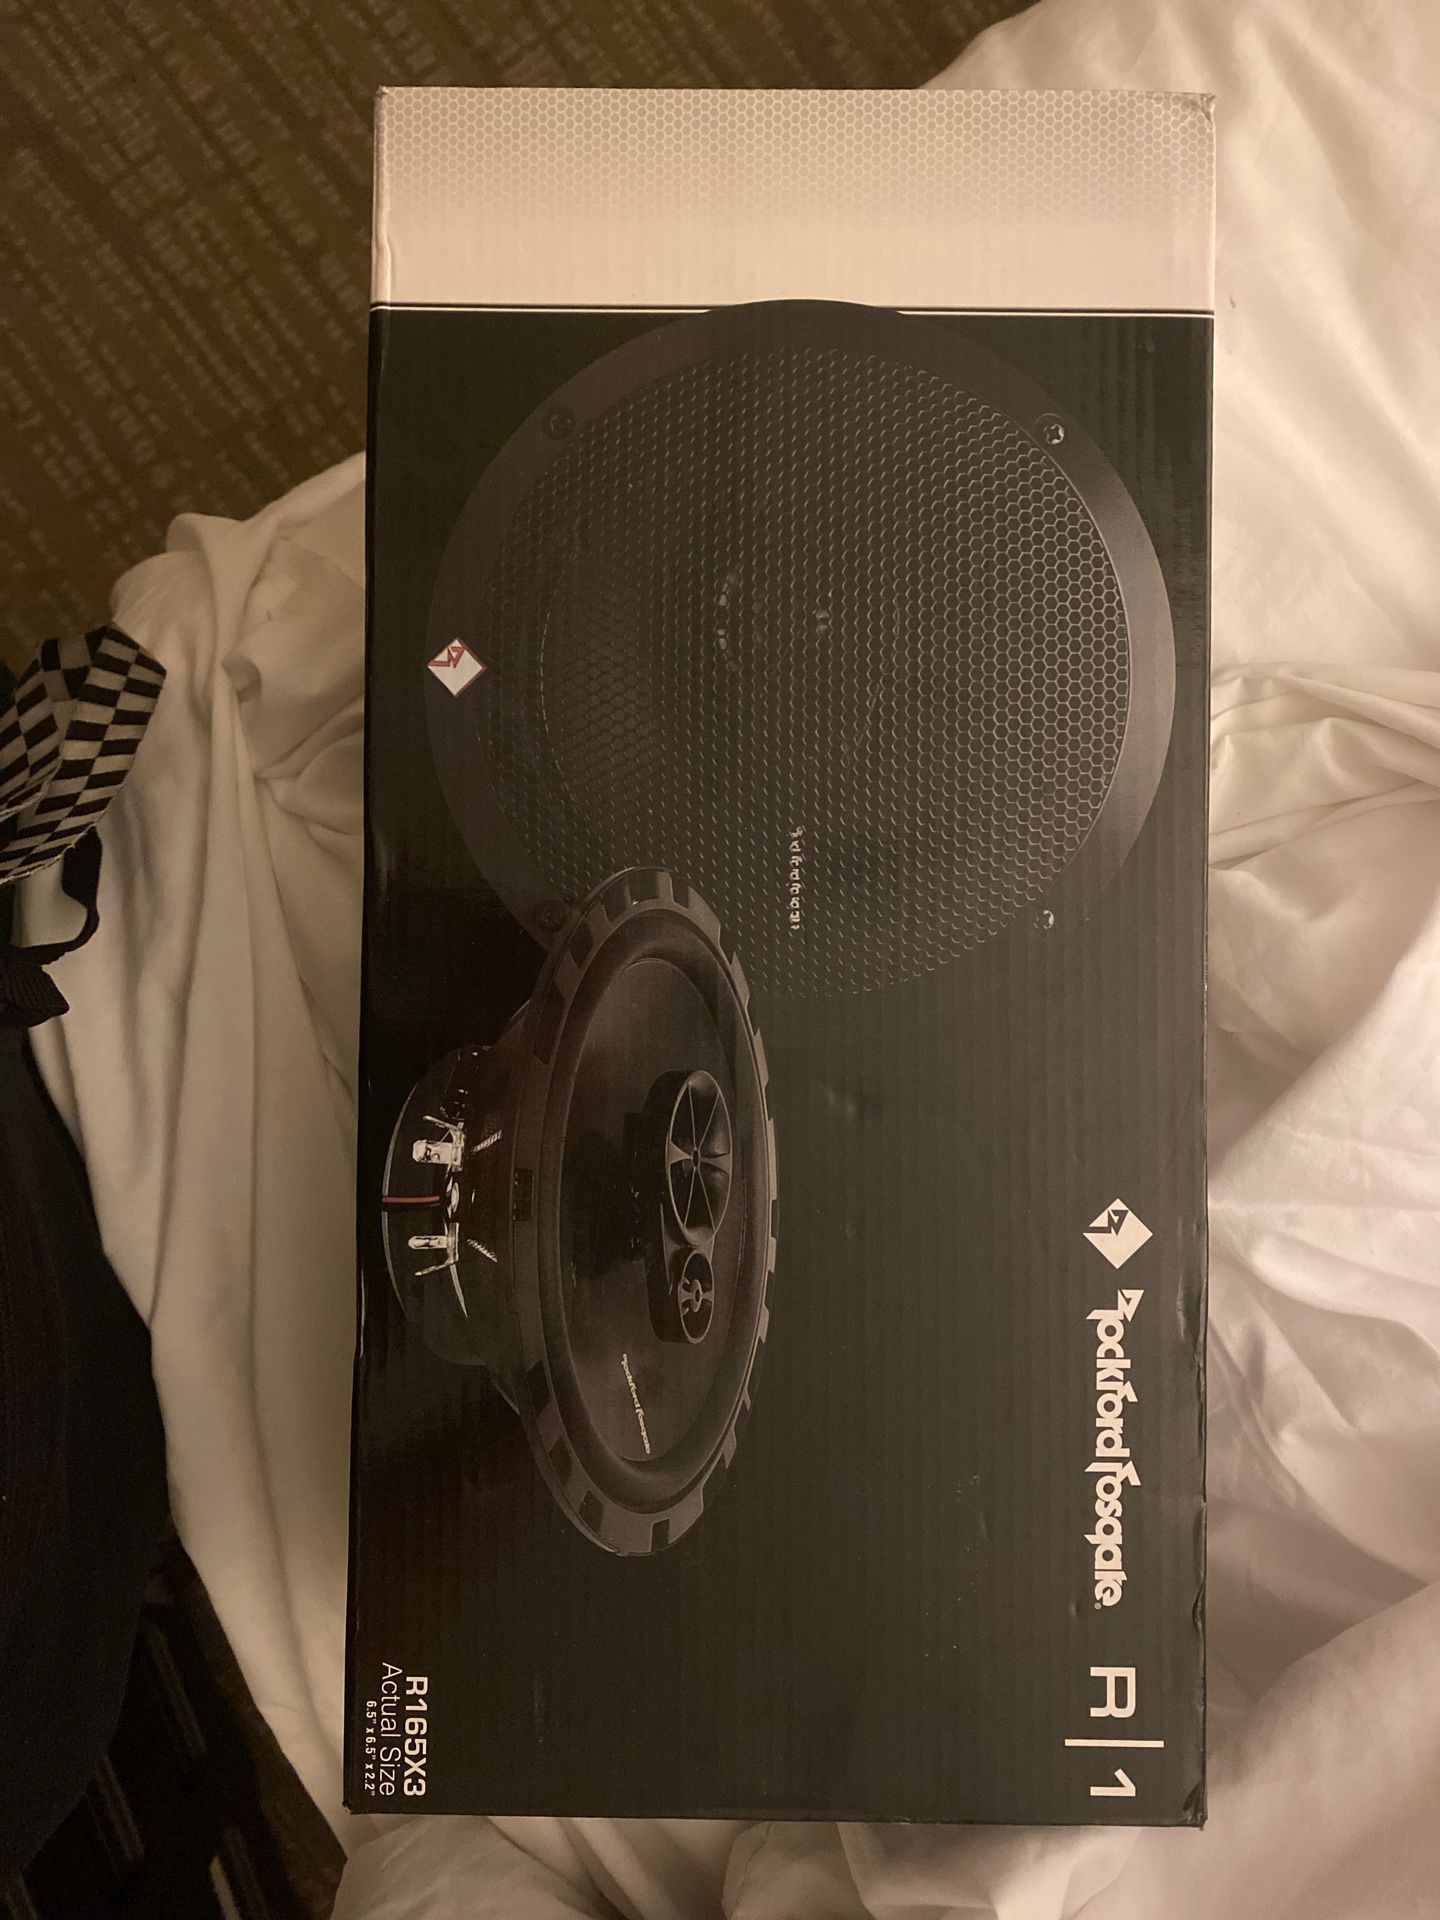 Serious buyers only::: 2 Rockford Fosgate speakers